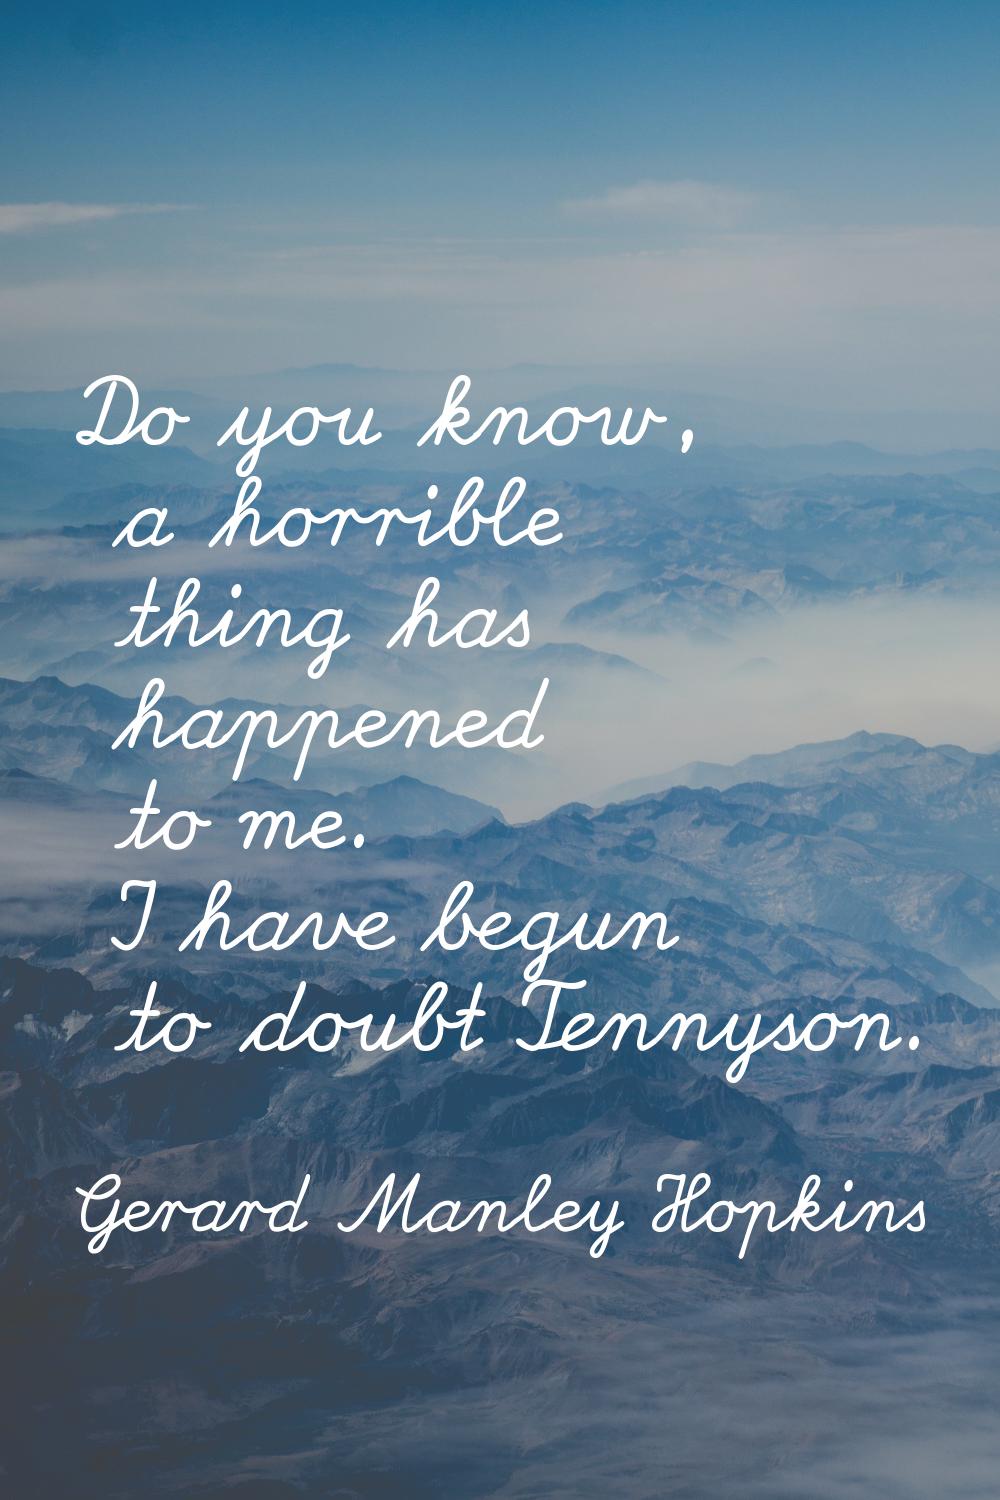 Do you know, a horrible thing has happened to me. I have begun to doubt Tennyson.